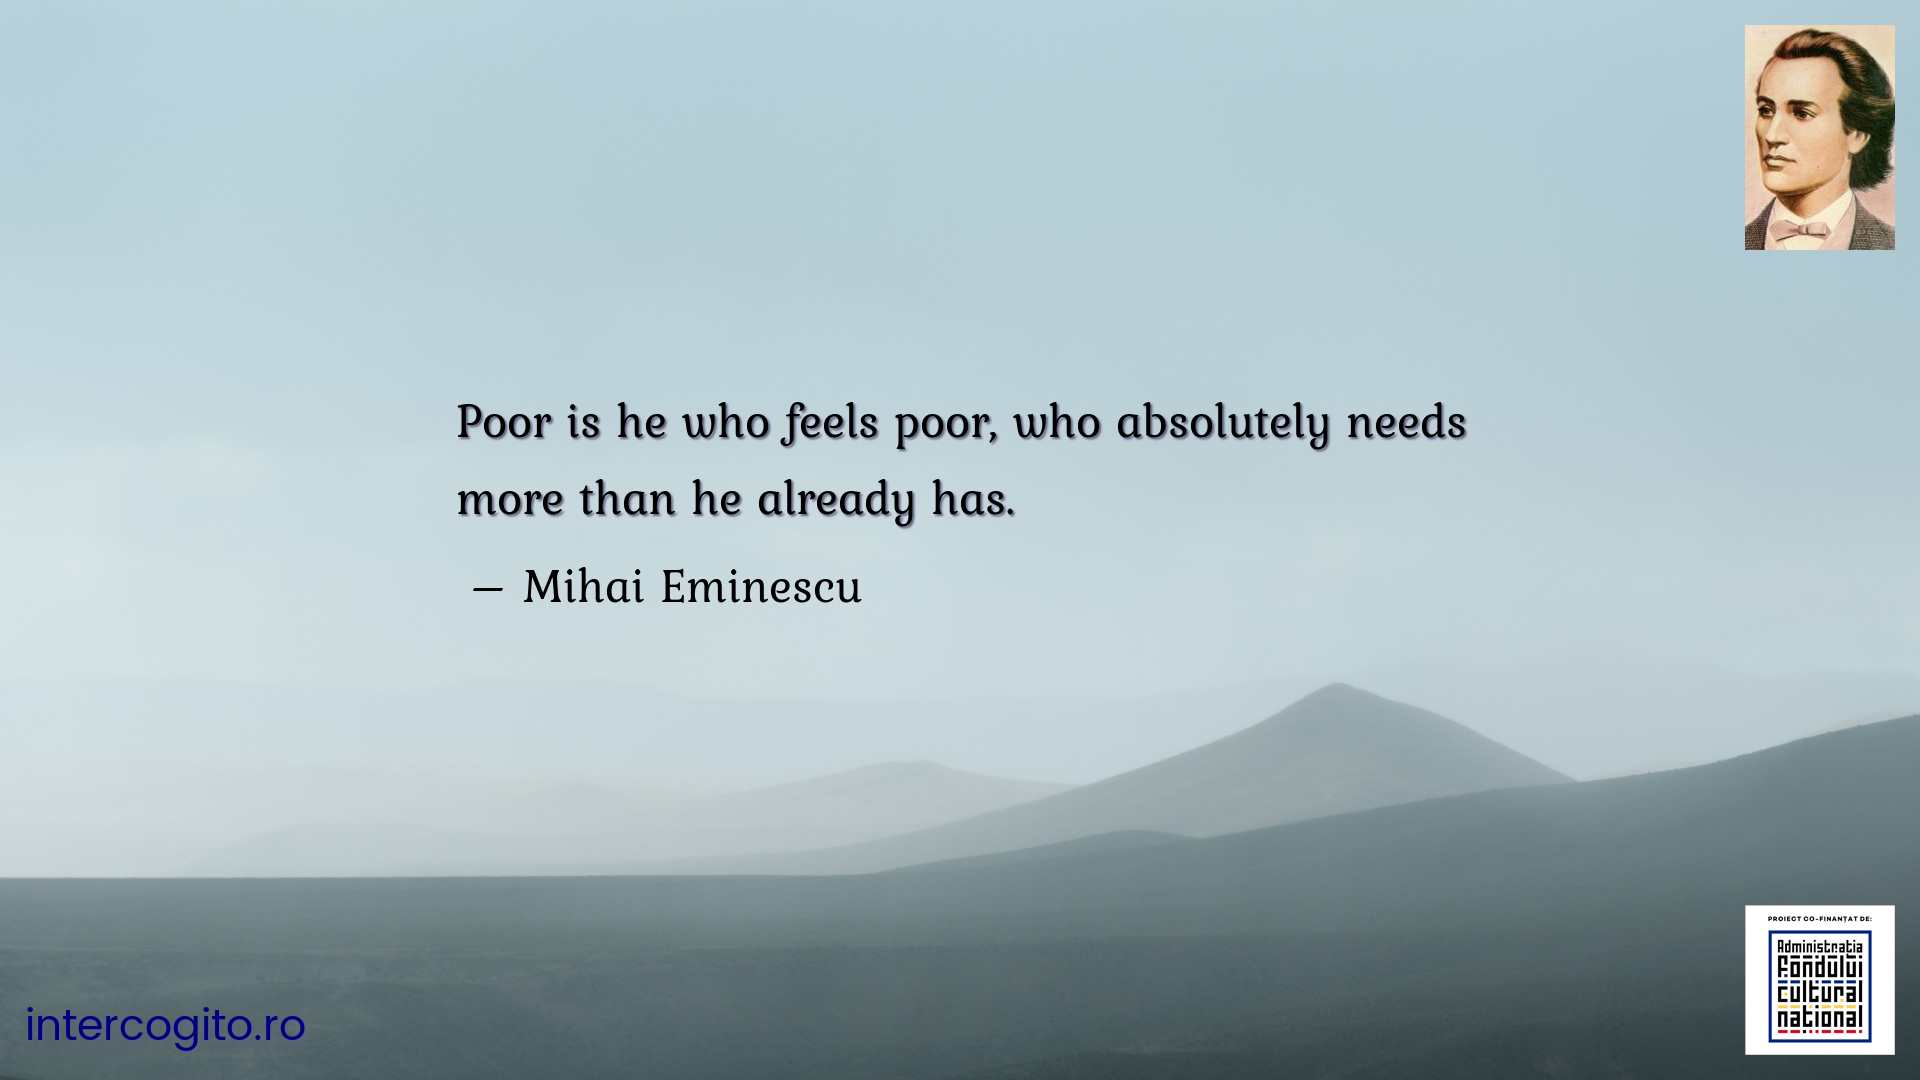 Poor is he who feels poor, who absolutely needs more than he already has.